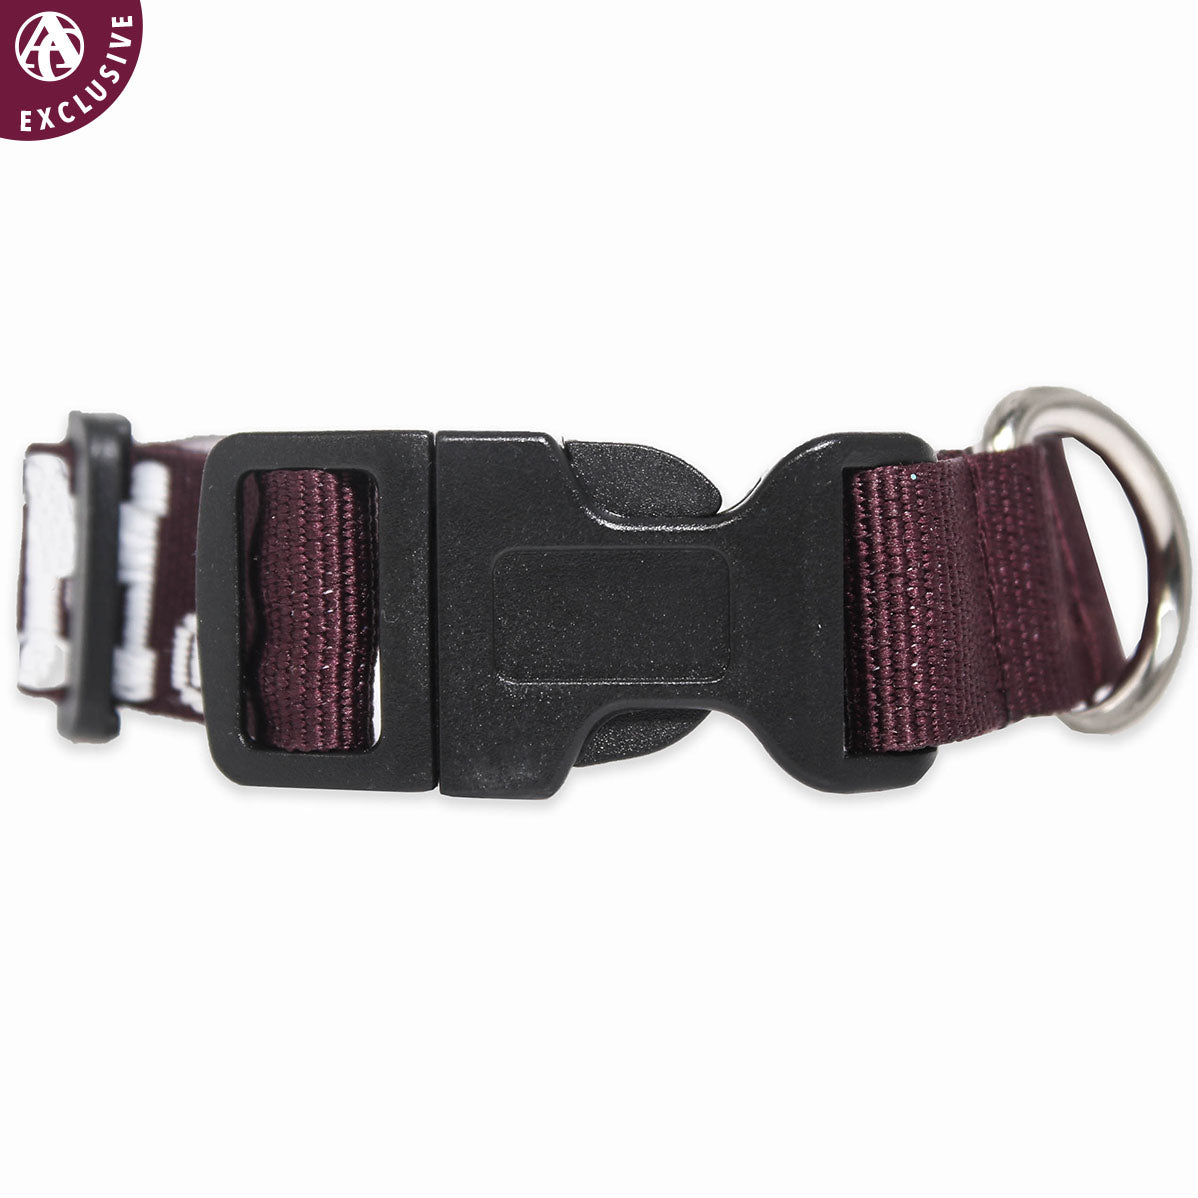 Texas A&M Embroidered Dog Collar